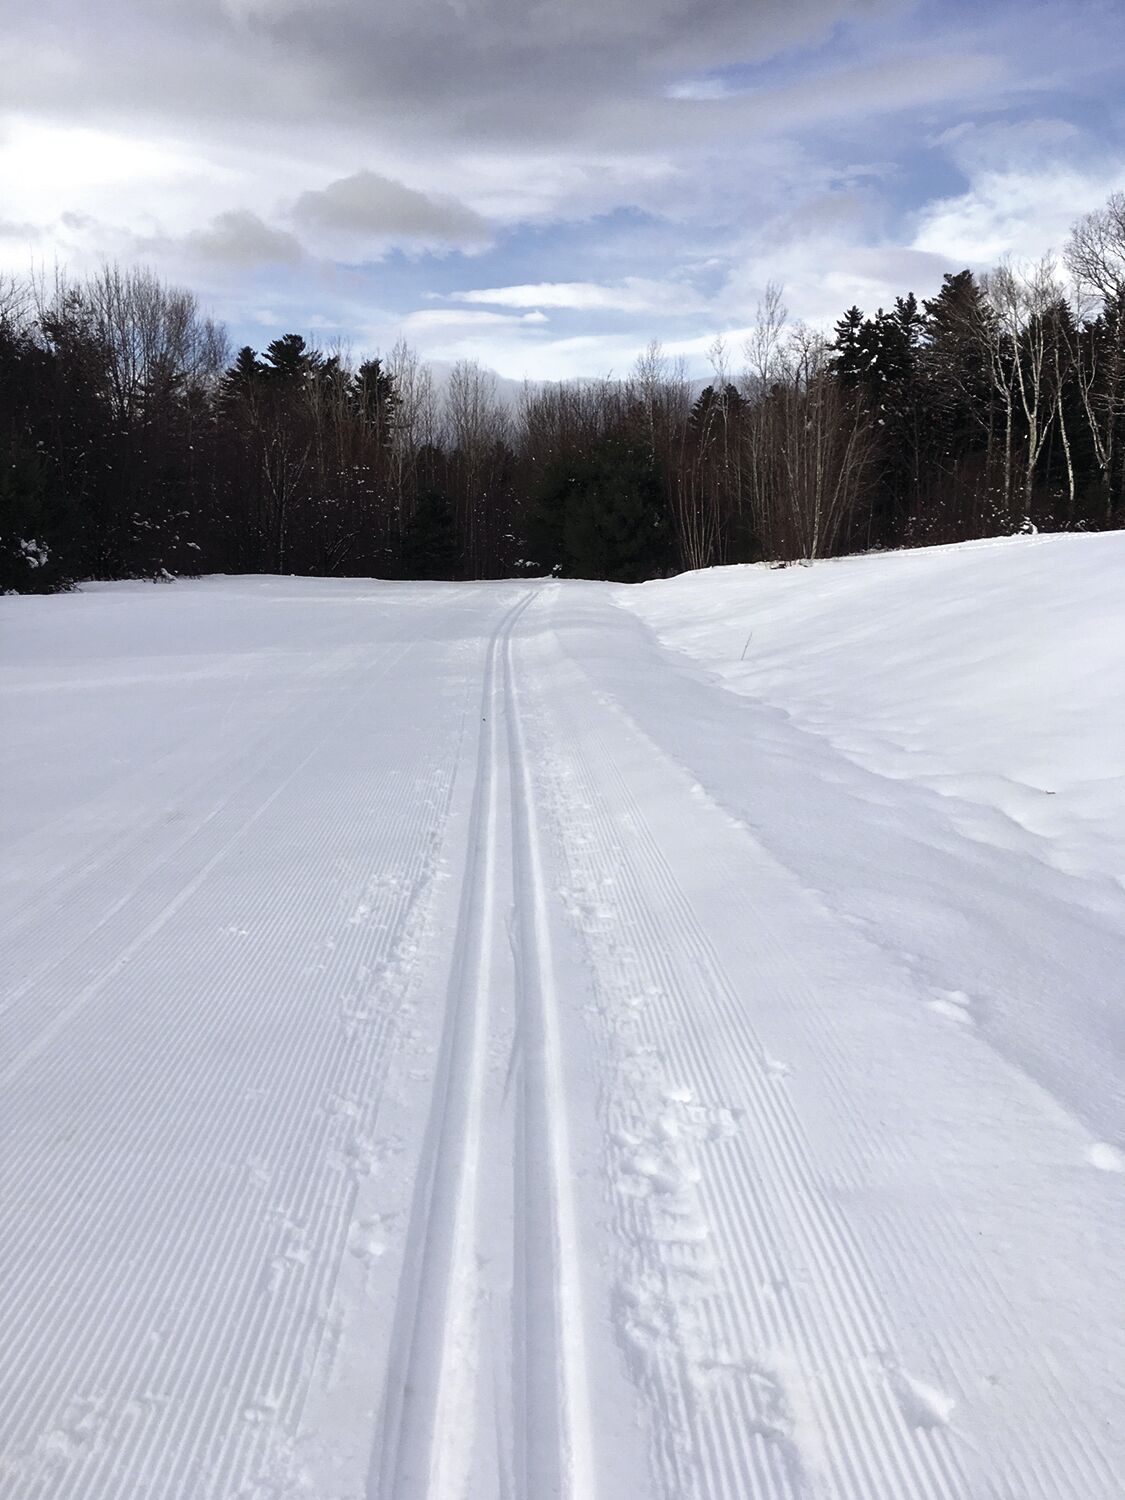 Nordic Tracks - perfect conditions